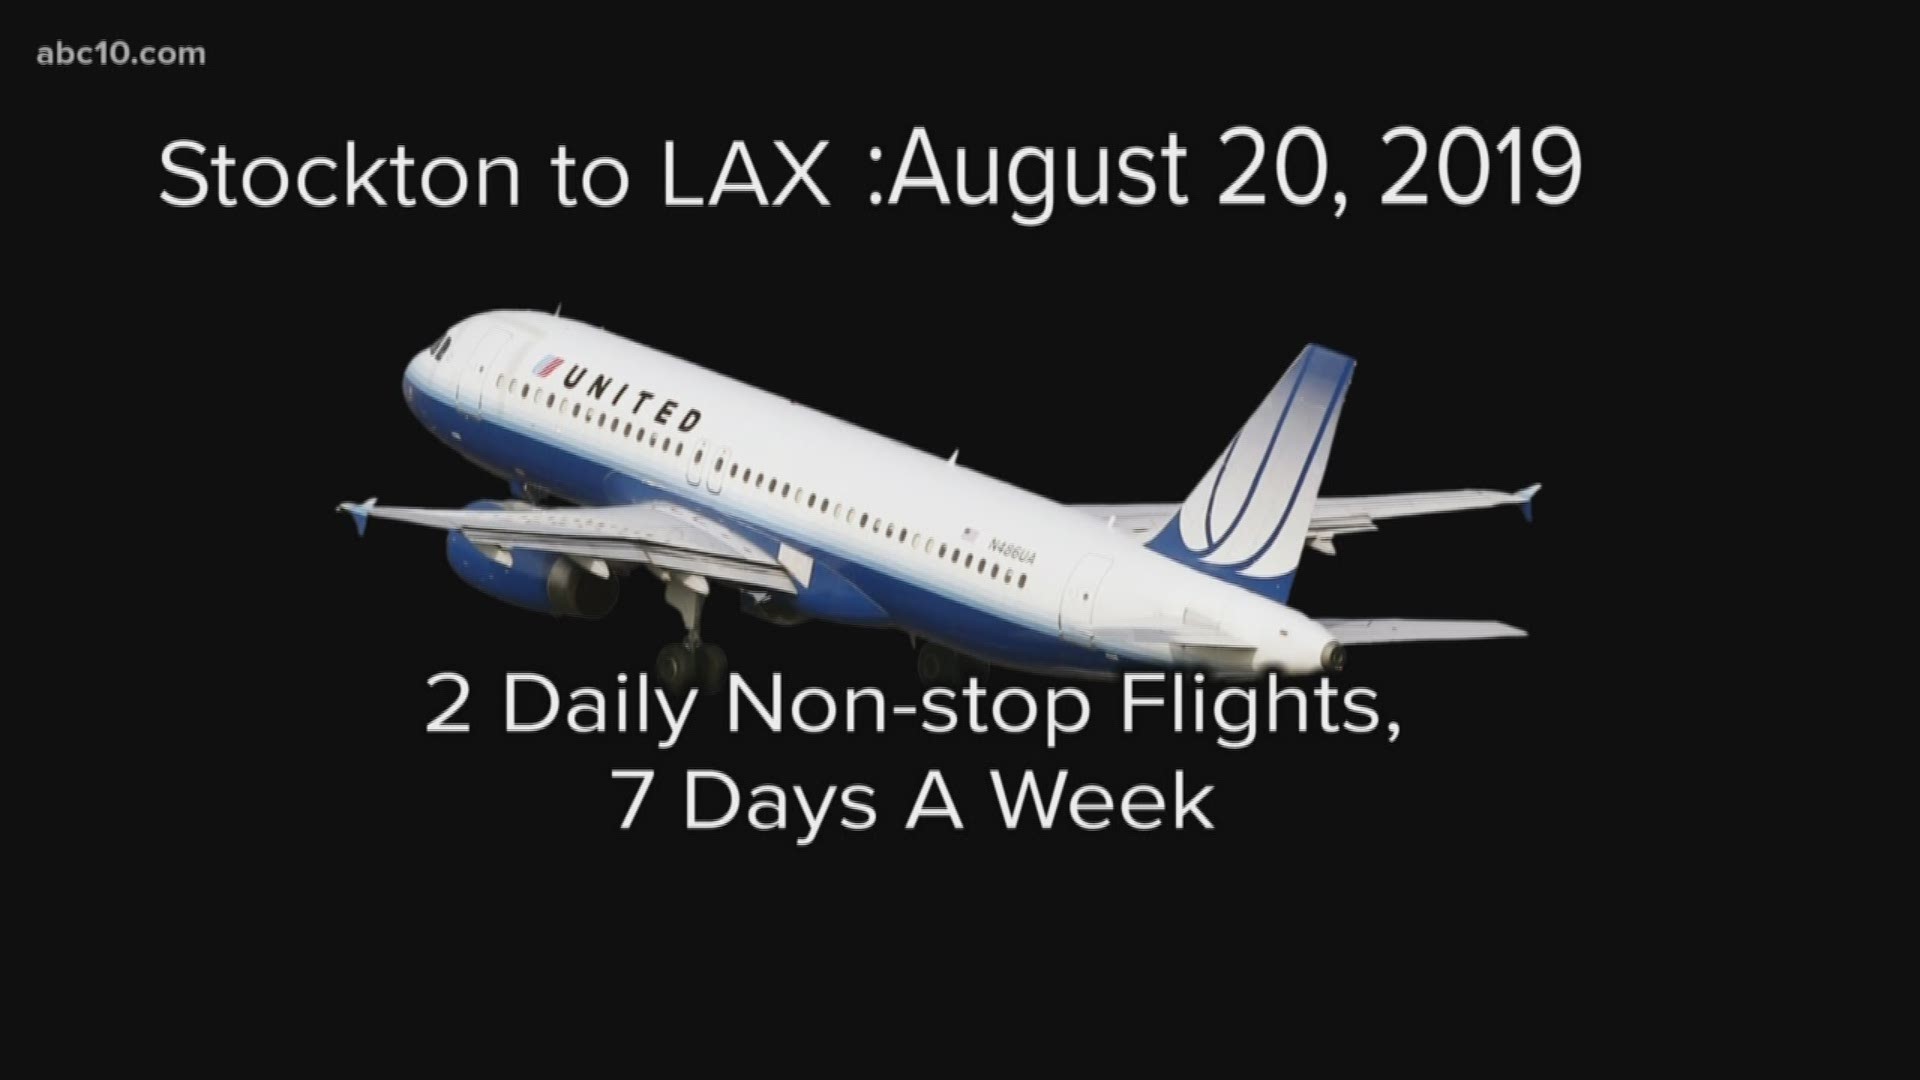 The Stockton skies just got a little friendlier after the airport announced a new airline carrier will operate there. Starting Aug. 20, 2019, United Express, operated by Skywest Airlines, will provide service to Stockton Metropolitan Airport with two daily non-stop flights, seven days a week to LAX.